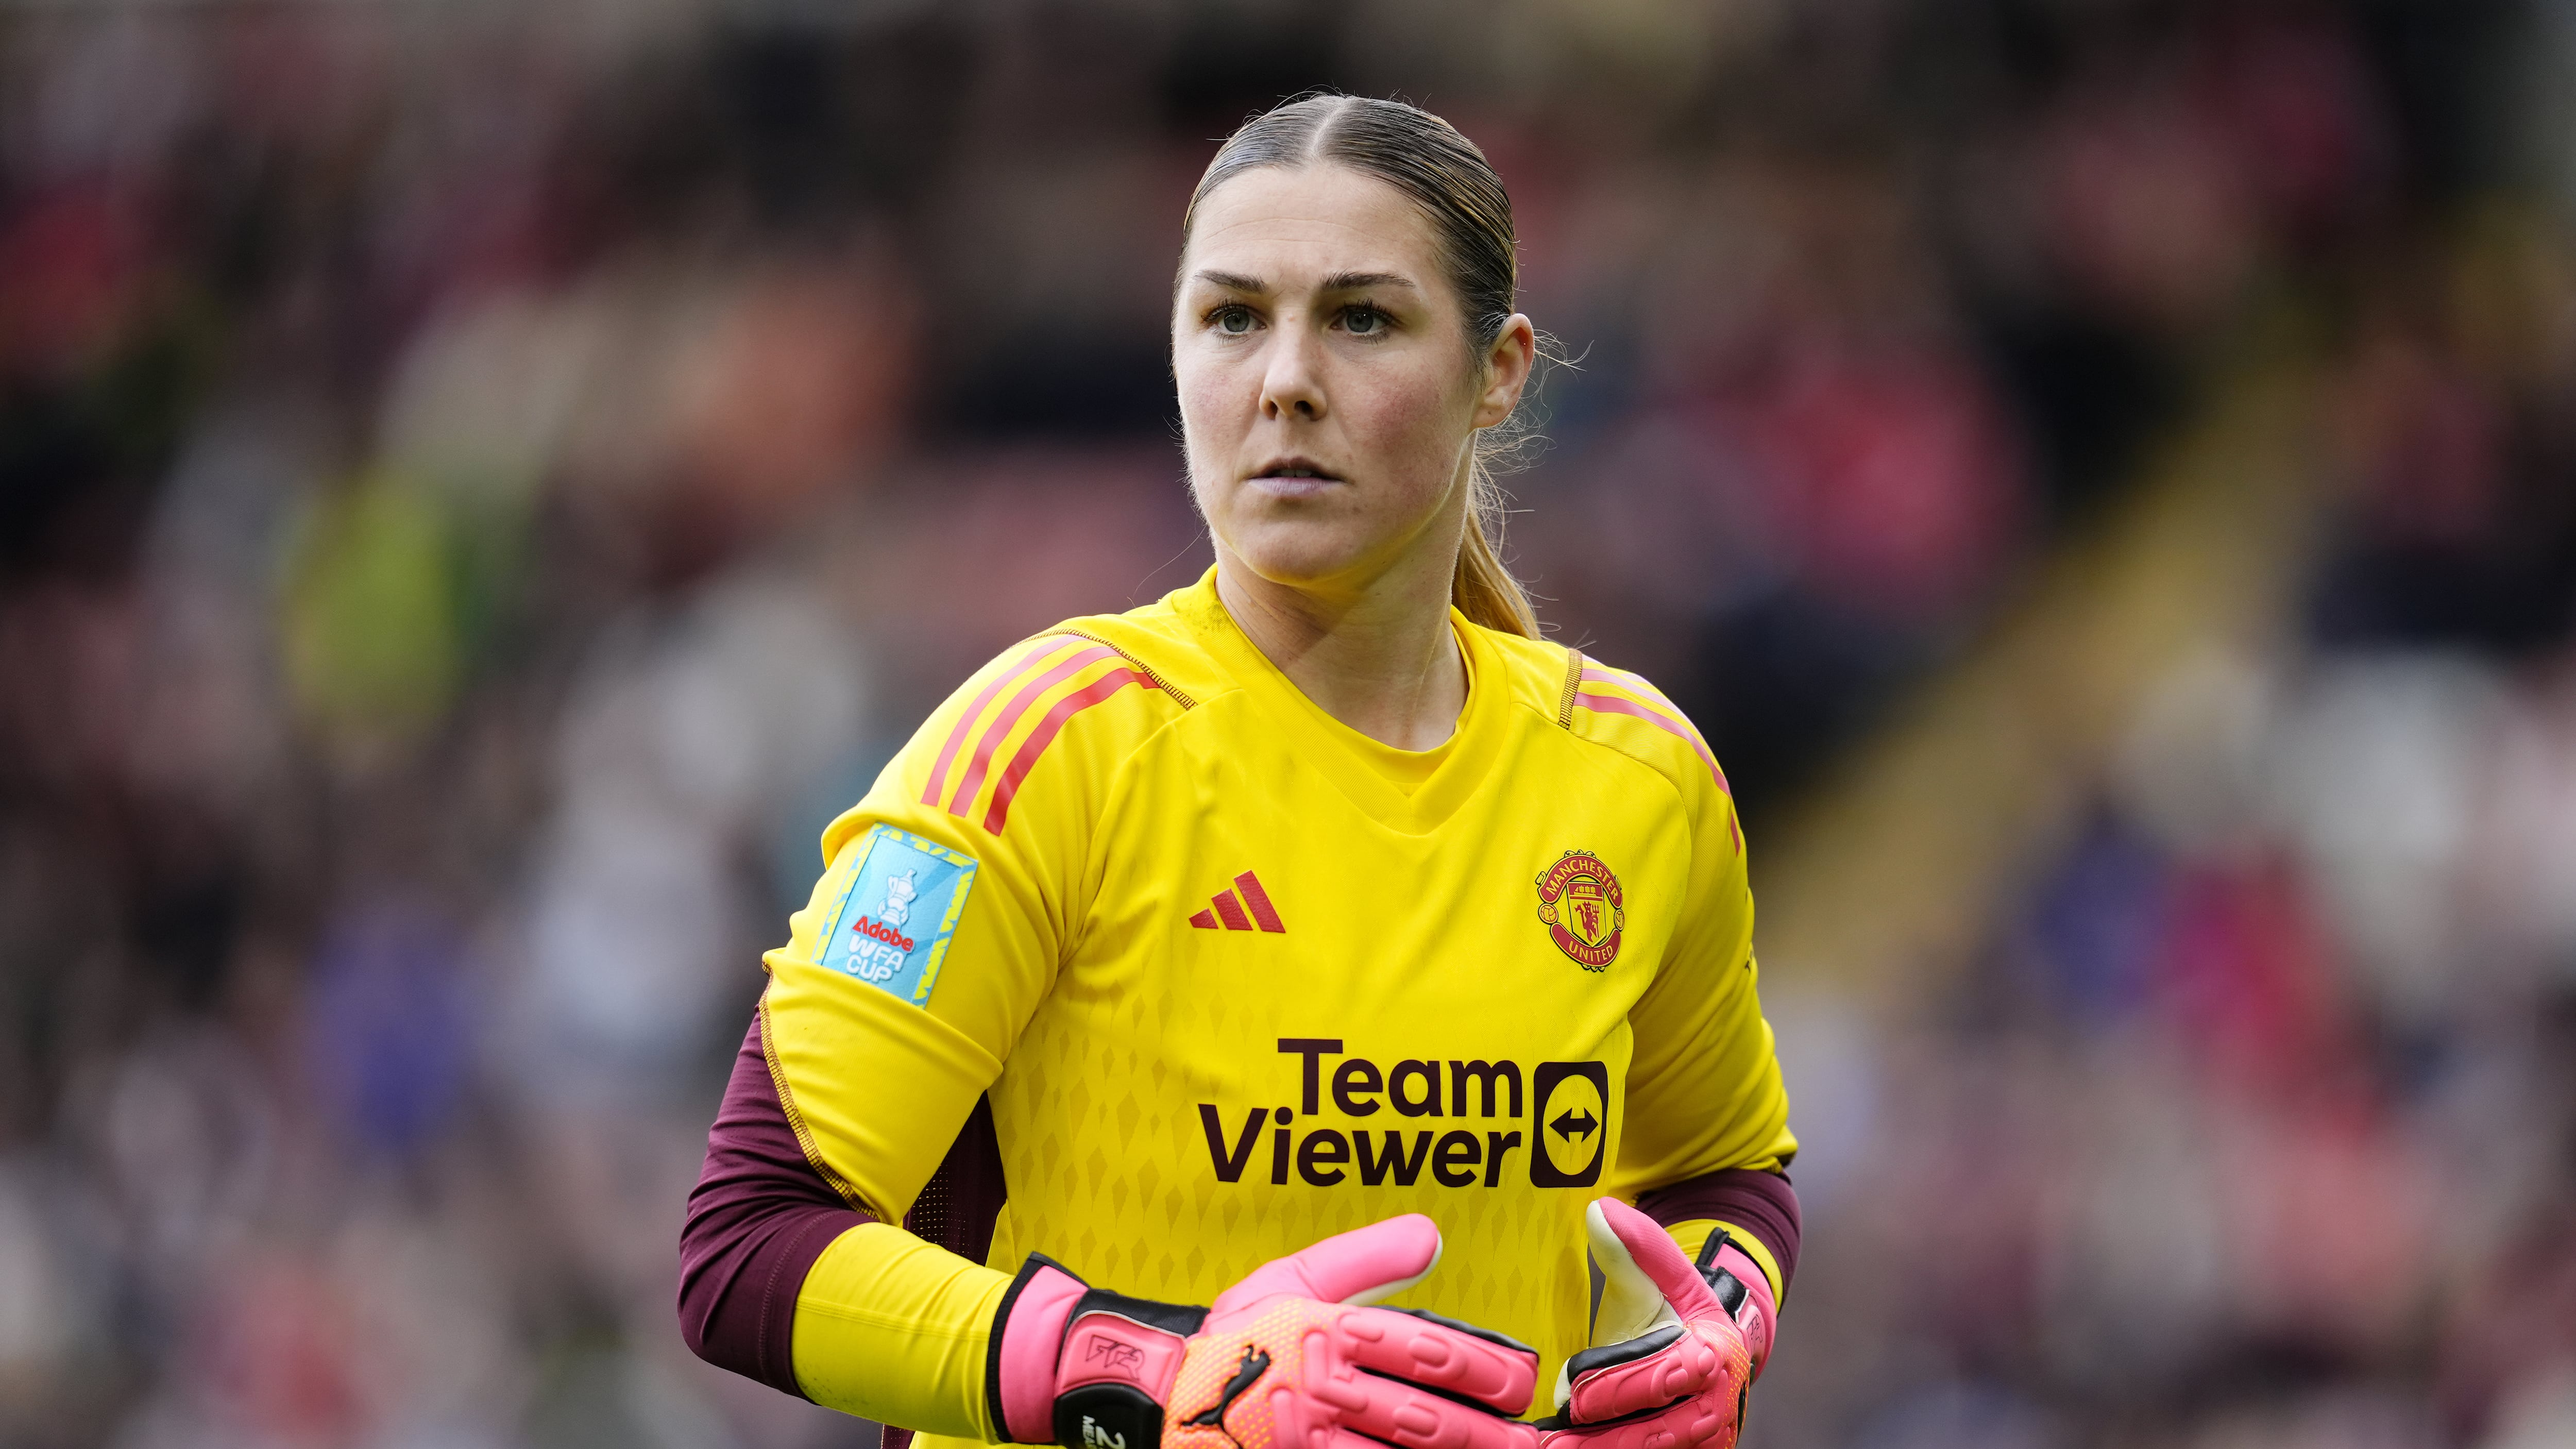 England goalkeeper Mary Earps will leave Manchester United this summer